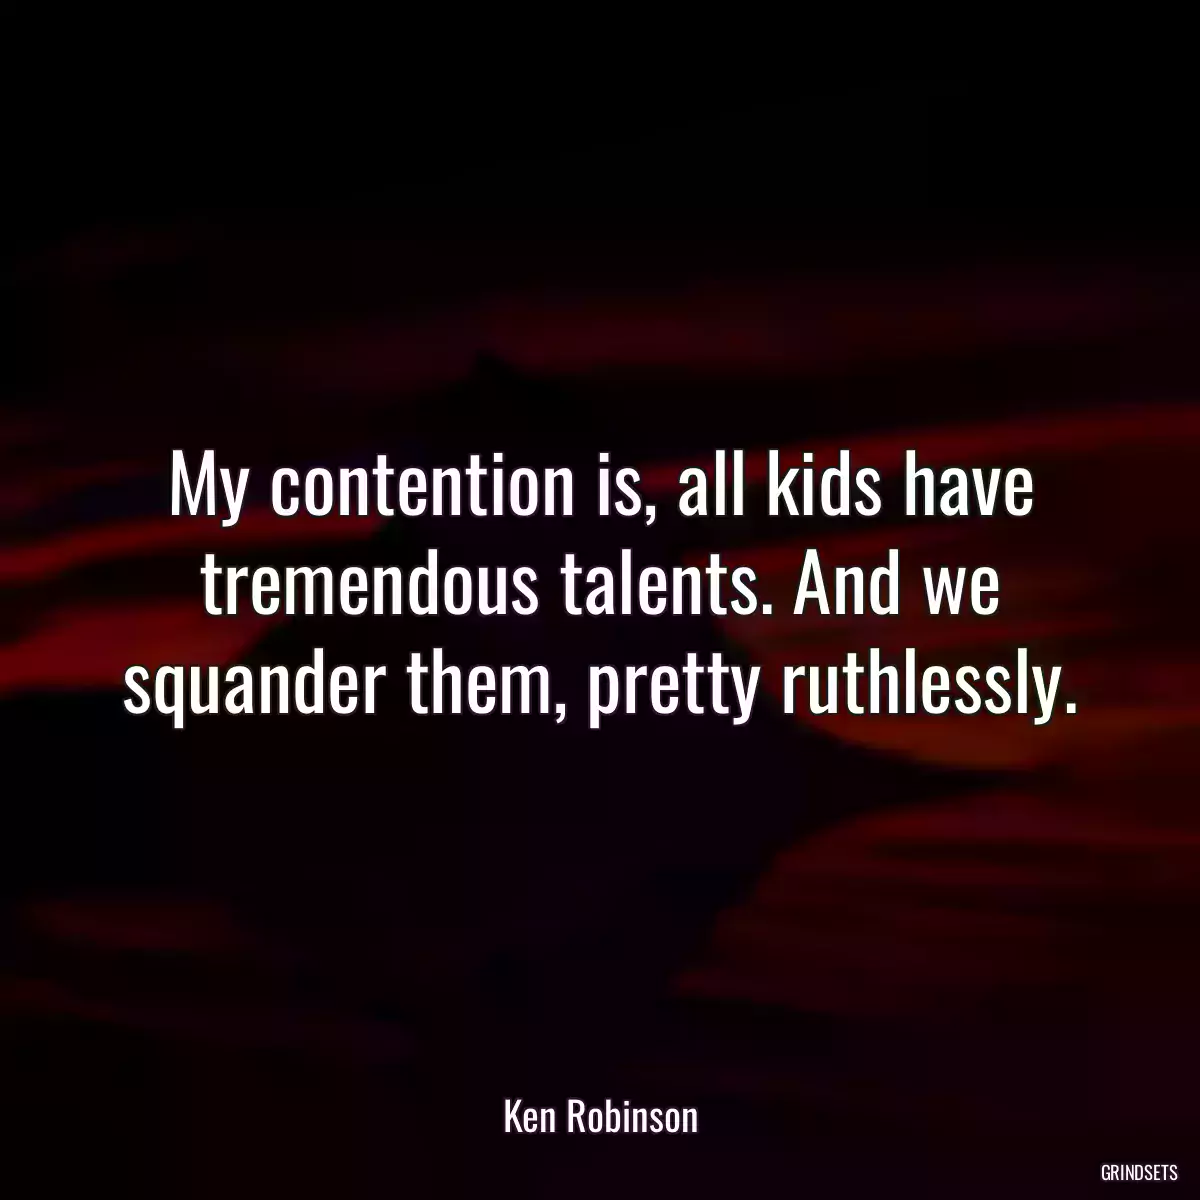 My contention is, all kids have tremendous talents. And we squander them, pretty ruthlessly.